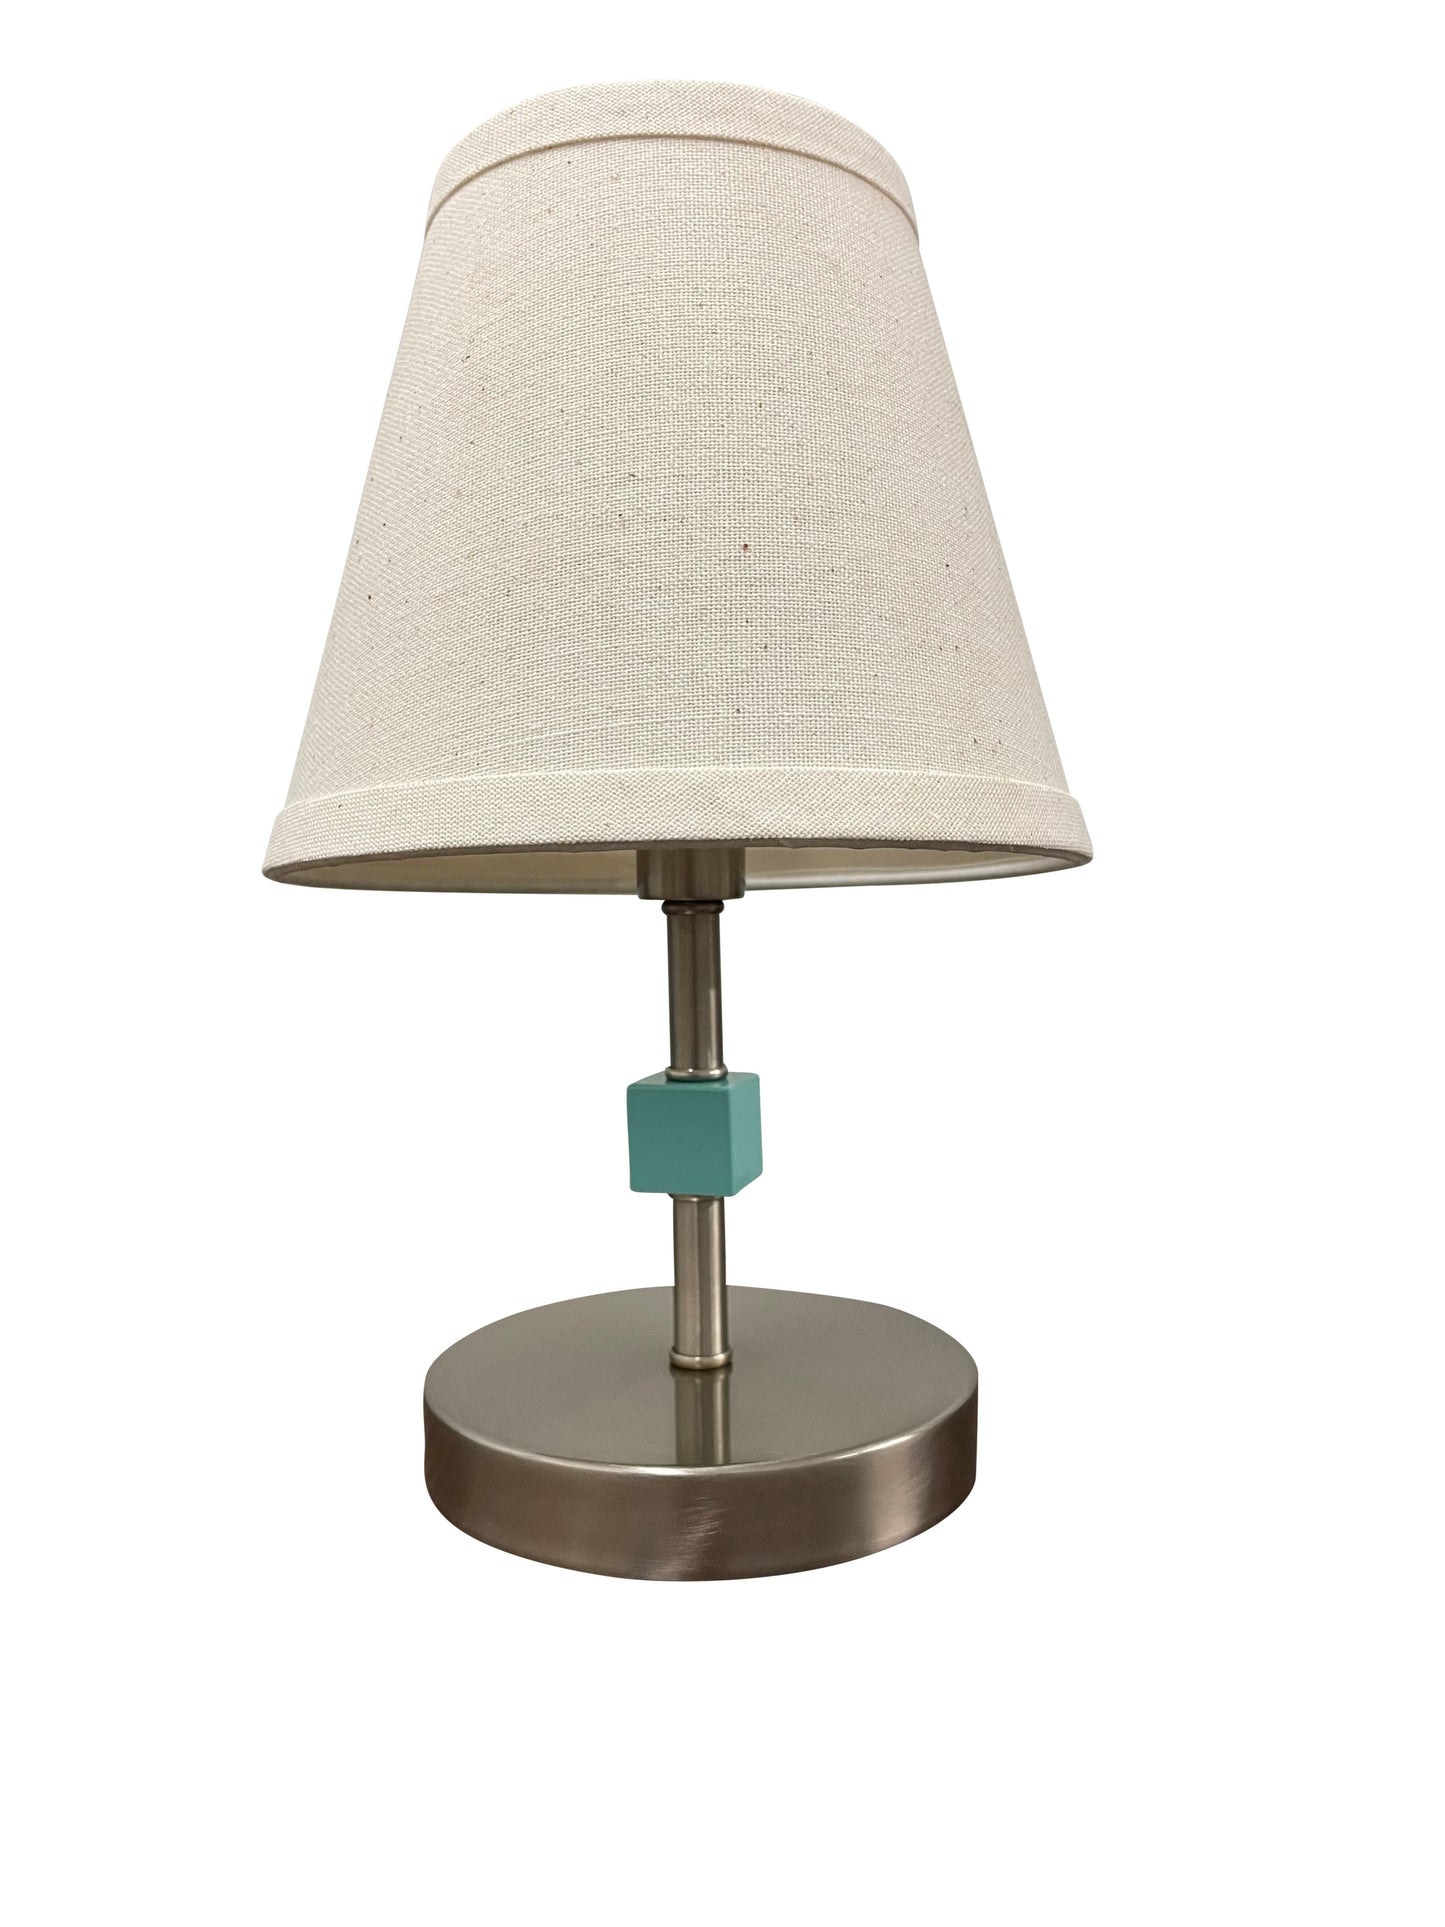 Bryson Mini Satin Nickel Mint Accent Lamp by House of Troy